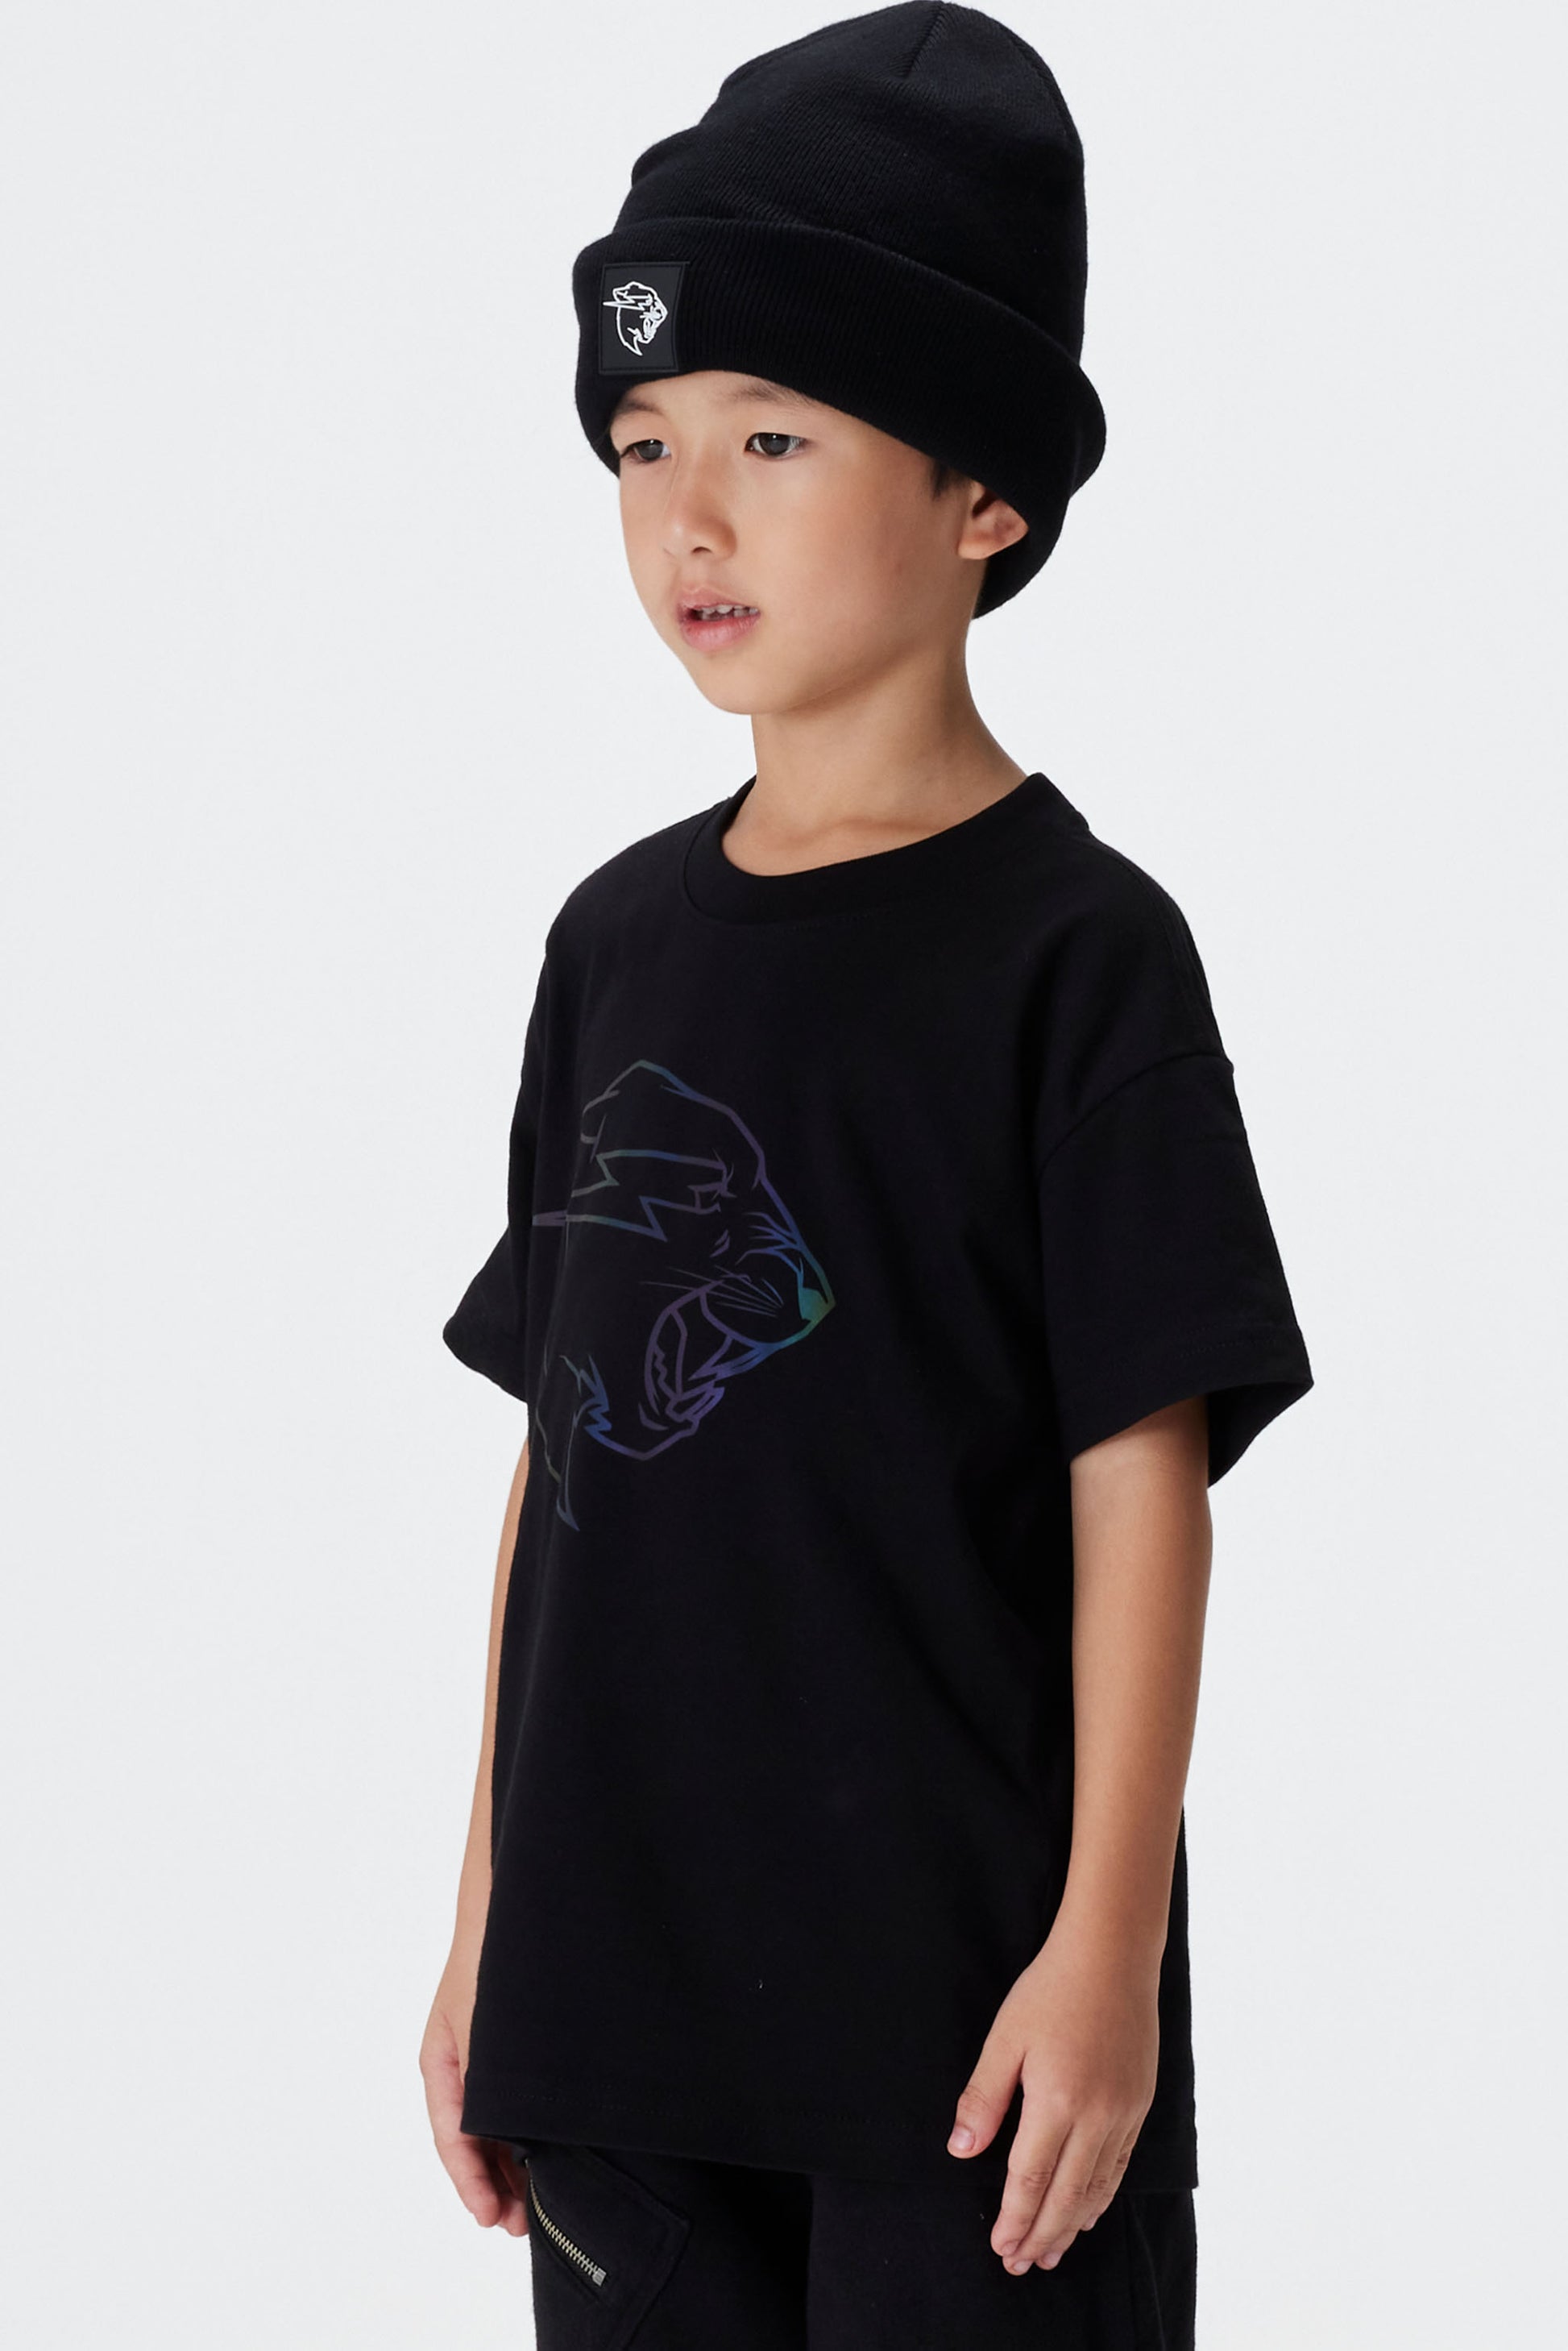 KIDS REFLECTIVE PANTHER S/SLEEVE TEE - BLACK –